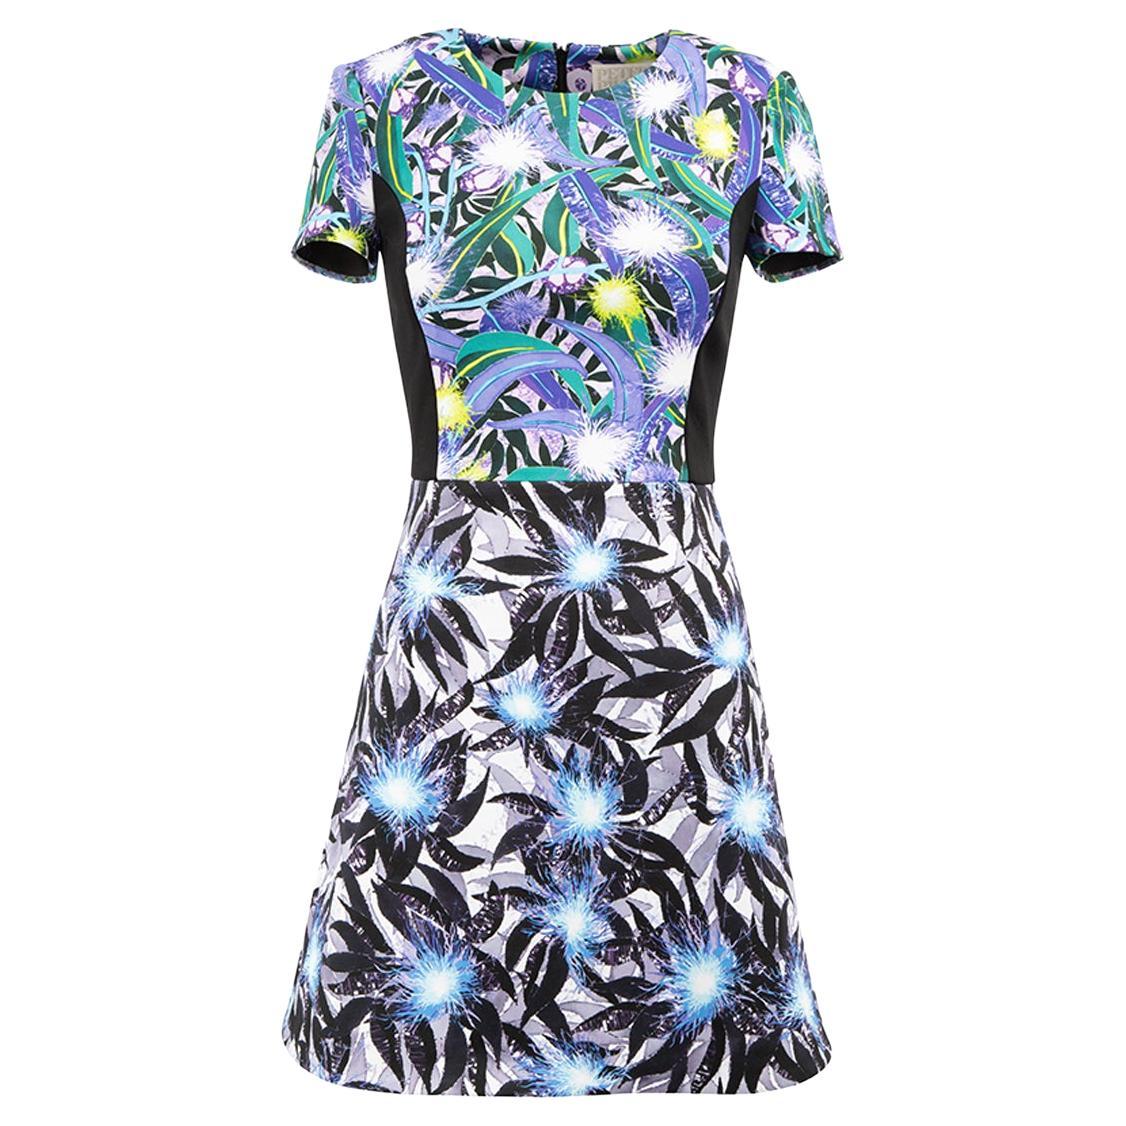 Peter Pilotto Women's Abstract Print Pattern Mini Dress For Sale